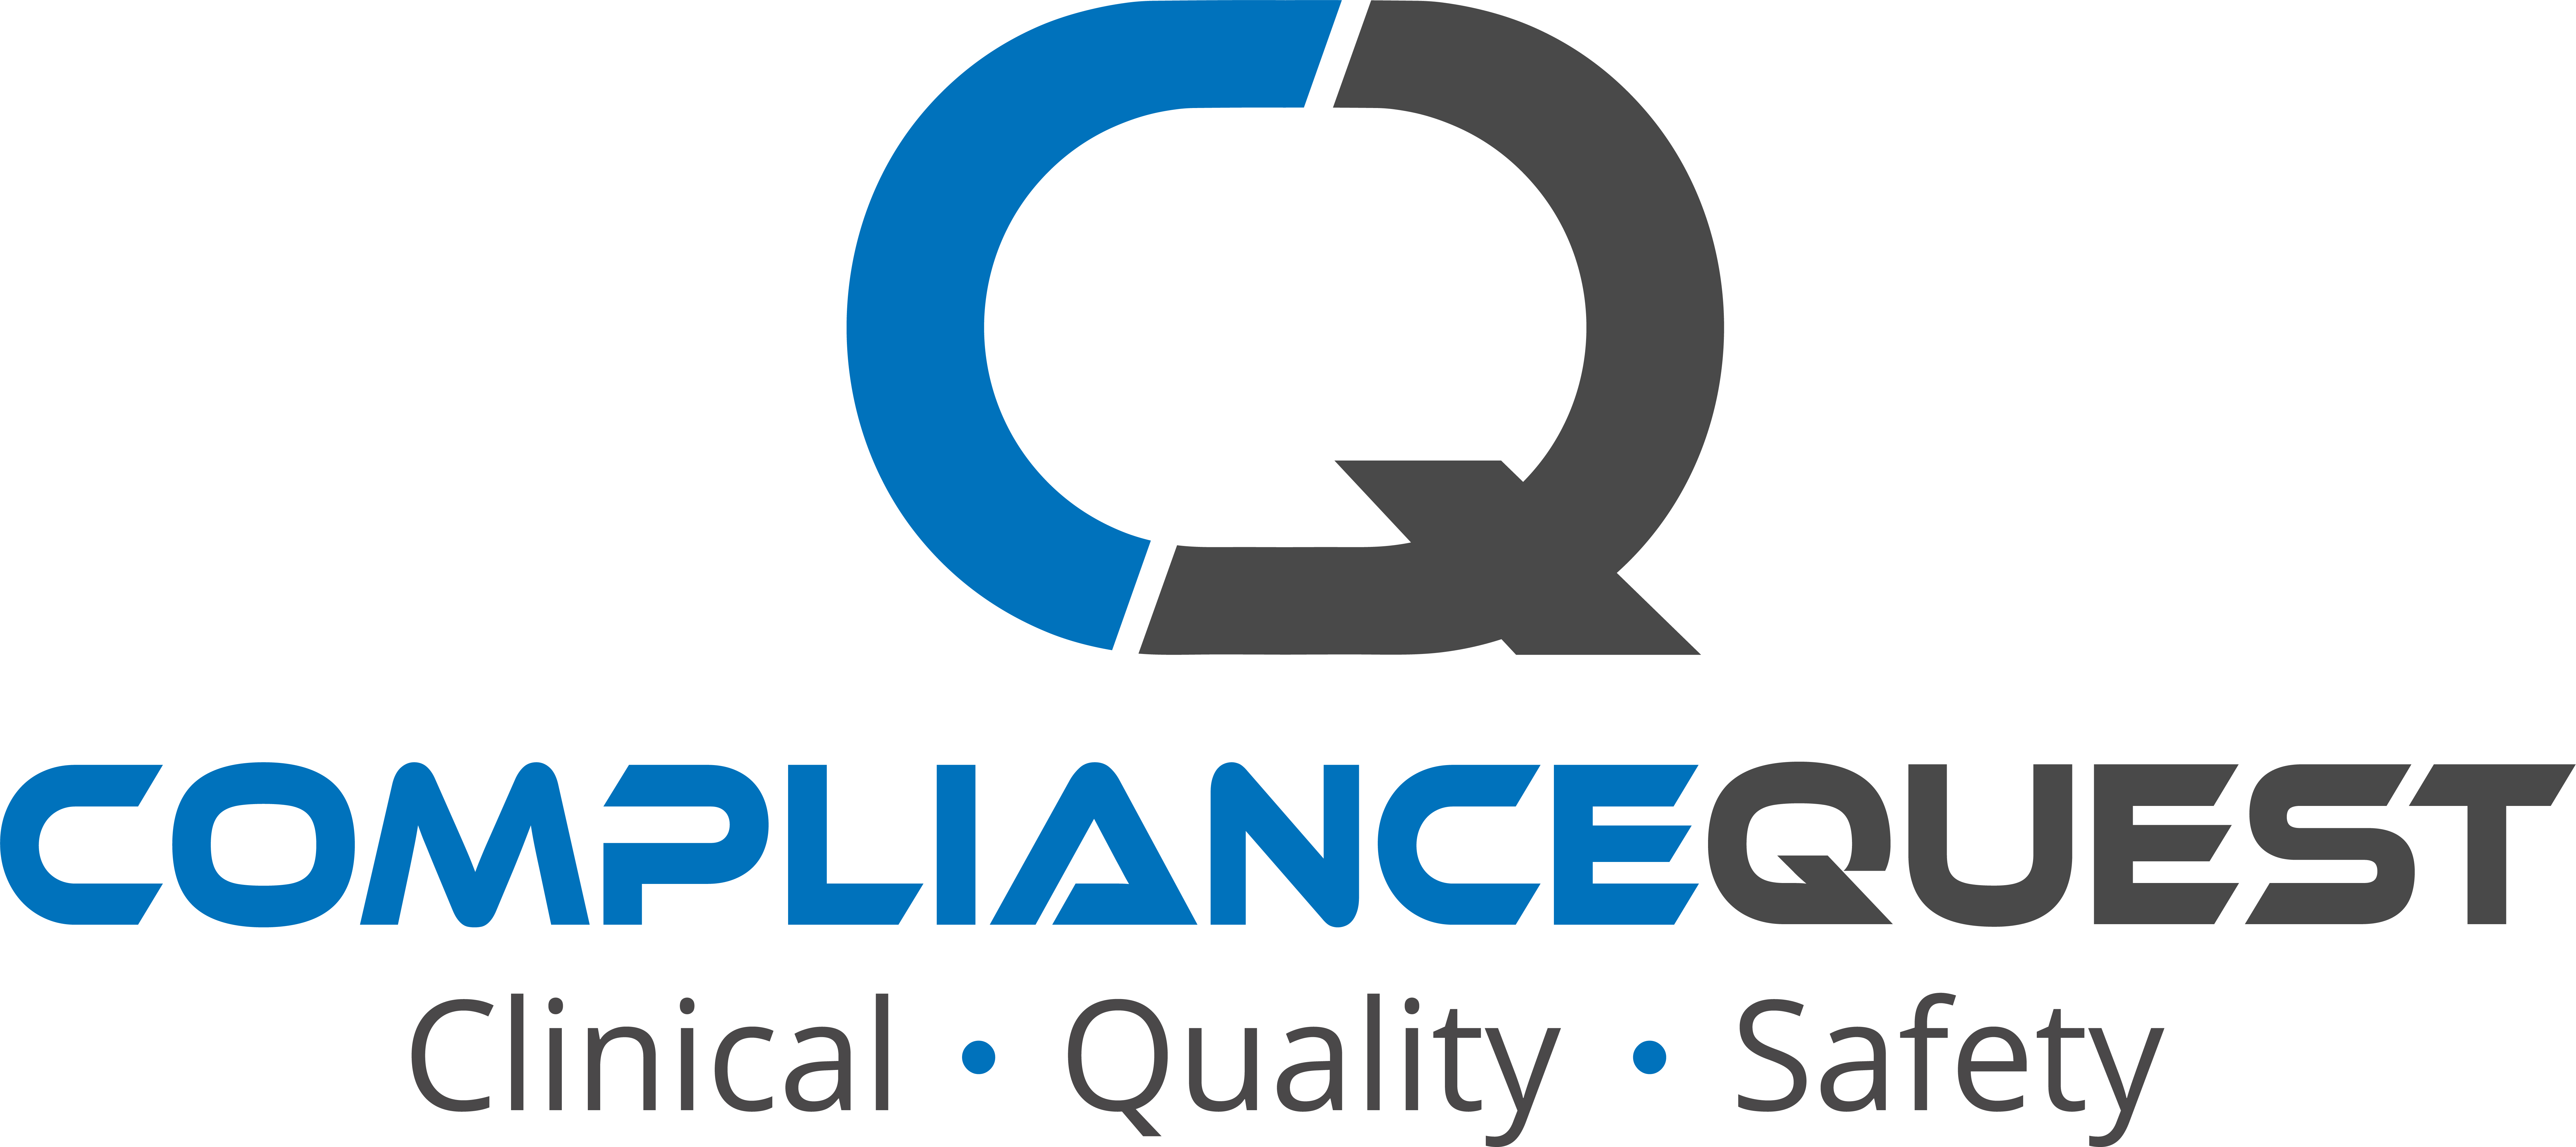 Featured Image for ComplianceQuest